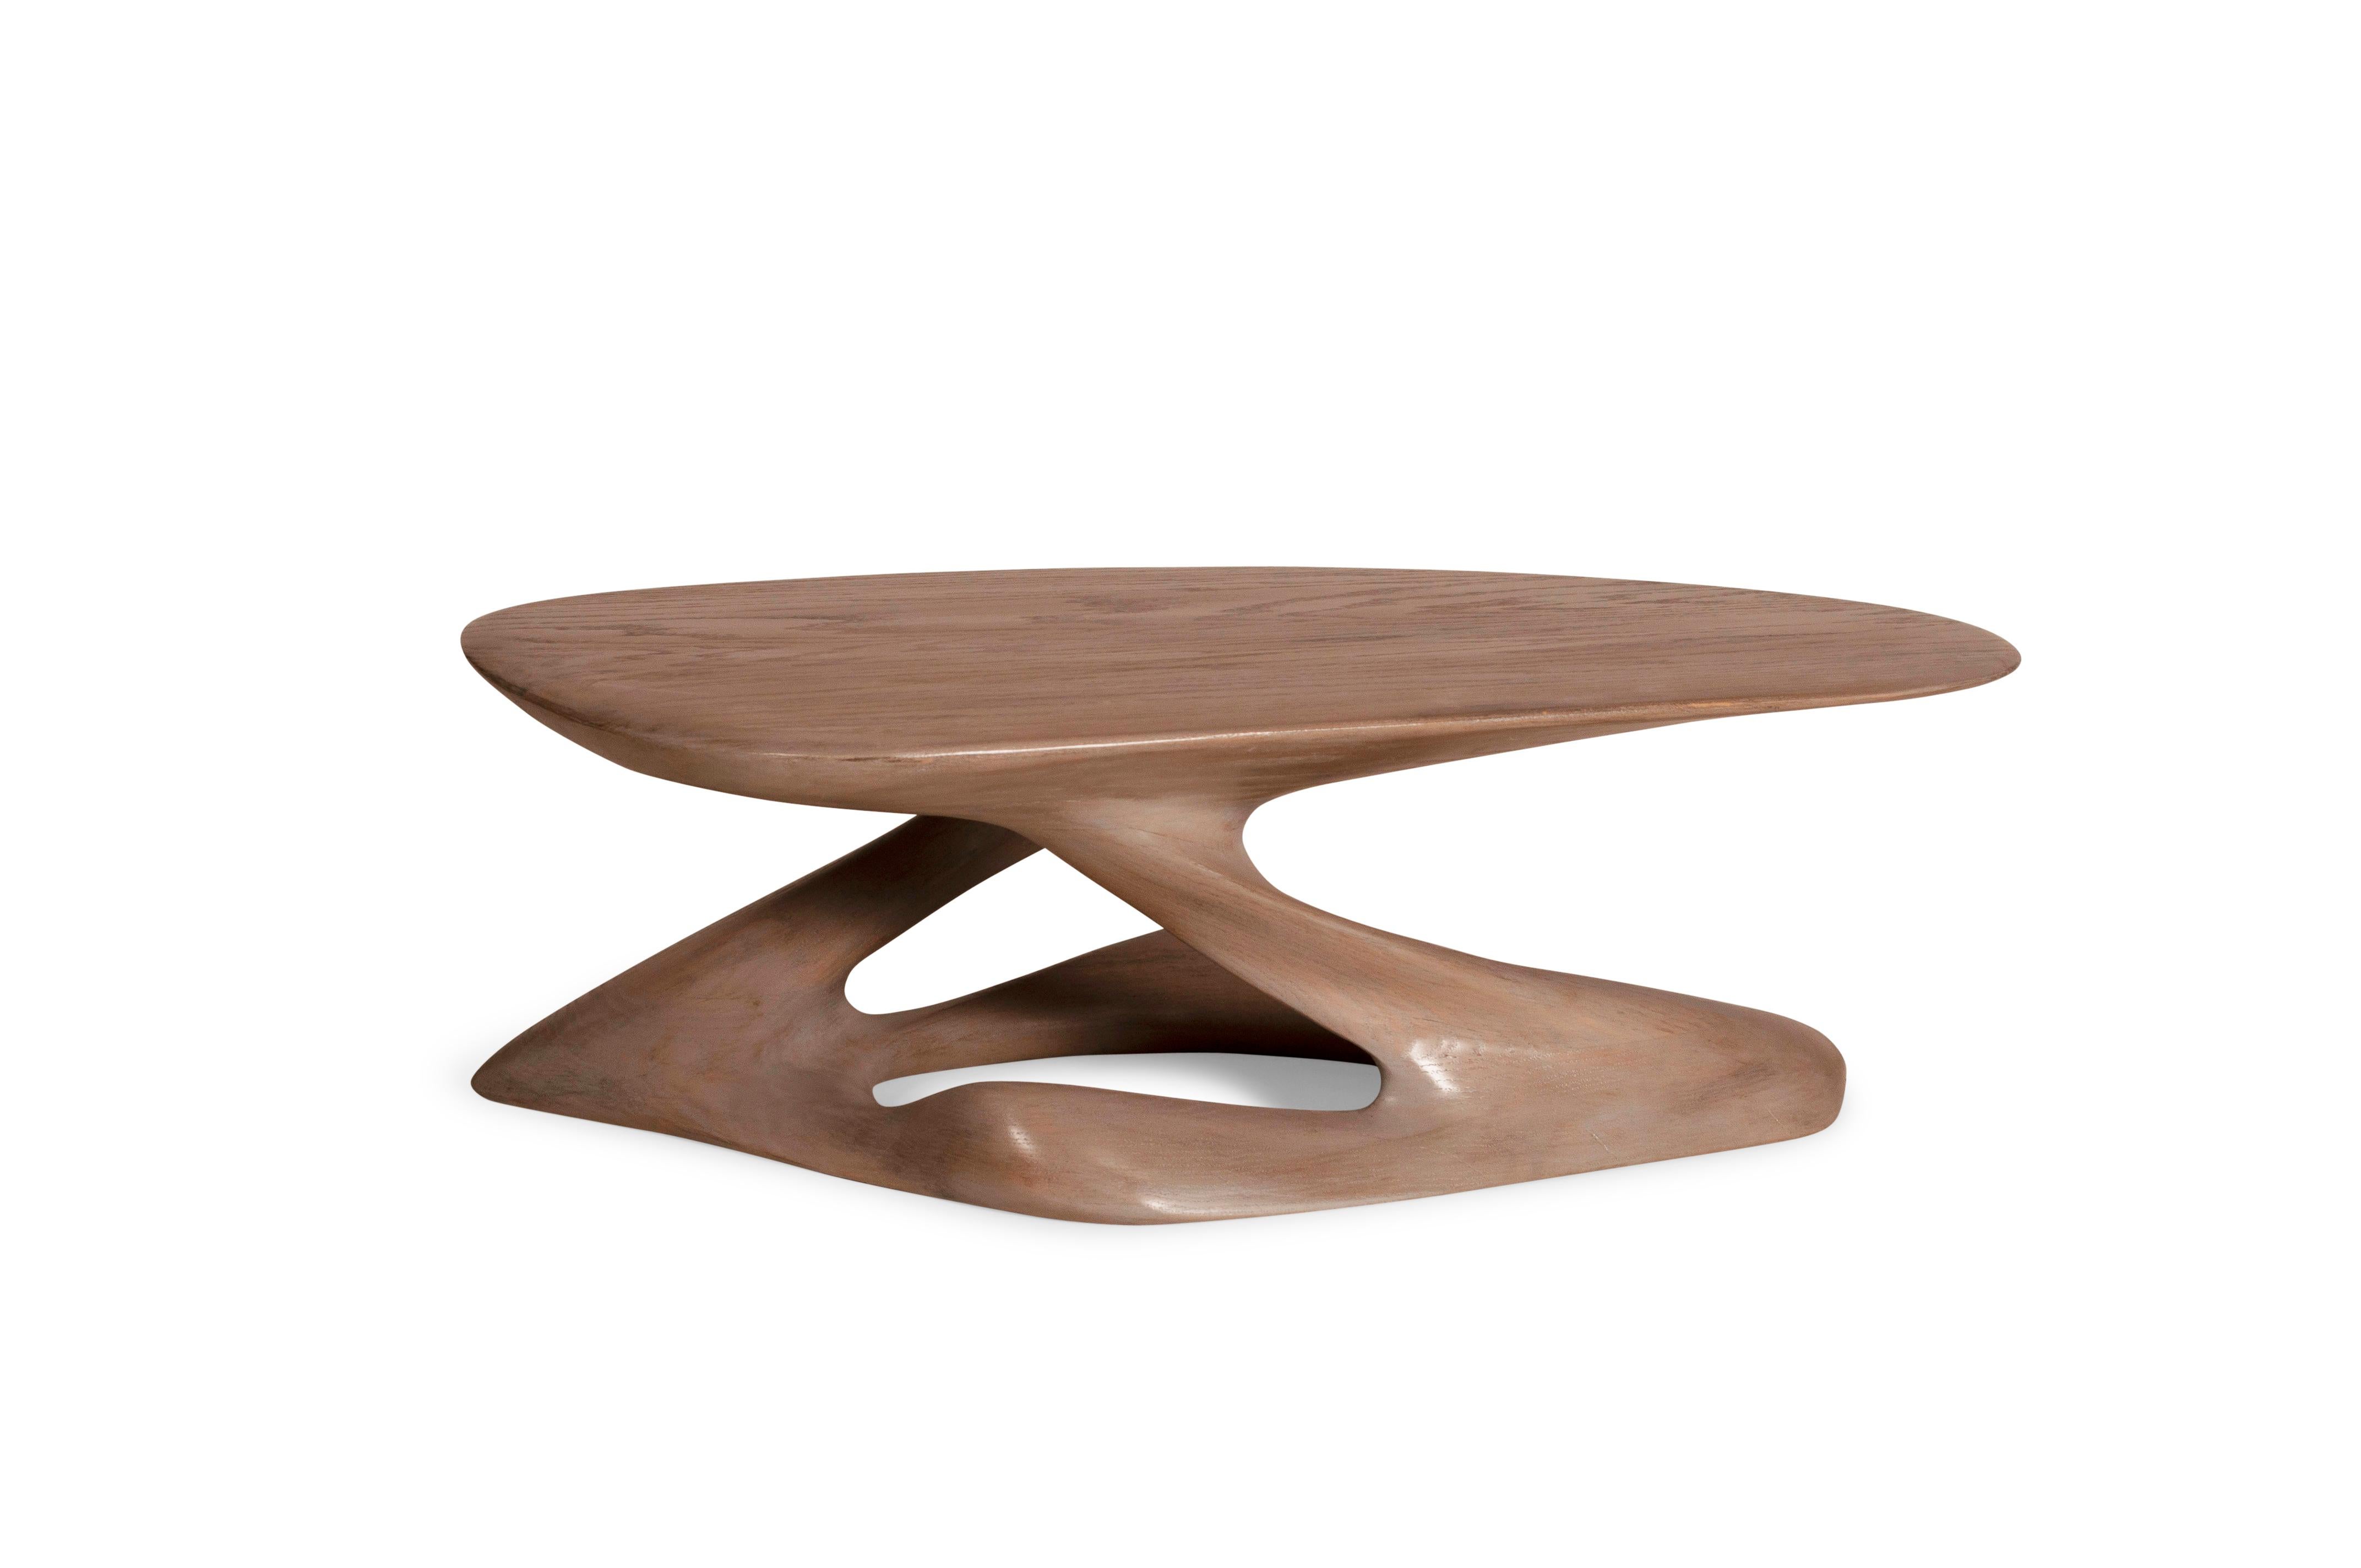 Plie coffee table _ Available in different finishes and custom sizes 
Dimensions: 36”W 22”D 12”H

It is available in different finishes and custom sizes. 

About Amorph: Amorph is a design and manufacturing company based in Los Angeles, California.